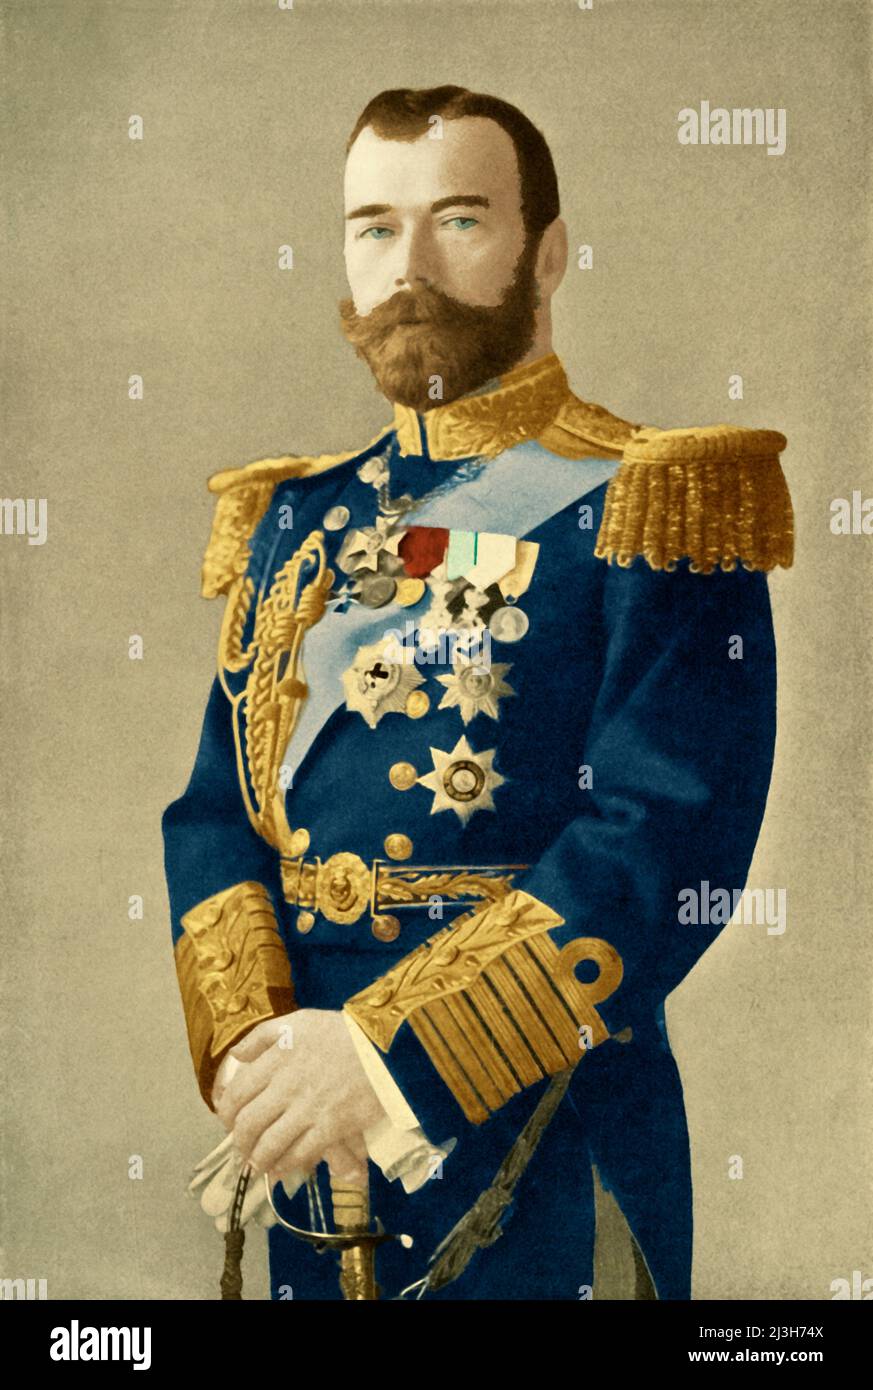 'The Tsar Nicholas II', 1910s, (1920). Portrait of Emperor Nicholas II of Russia(1868-1918). From &quot;The Great World War - A History: Volume 1&quot;. [The Gresham Publishing Company Ltd., London, 1920]. (Colorised black and white print). Stock Photo